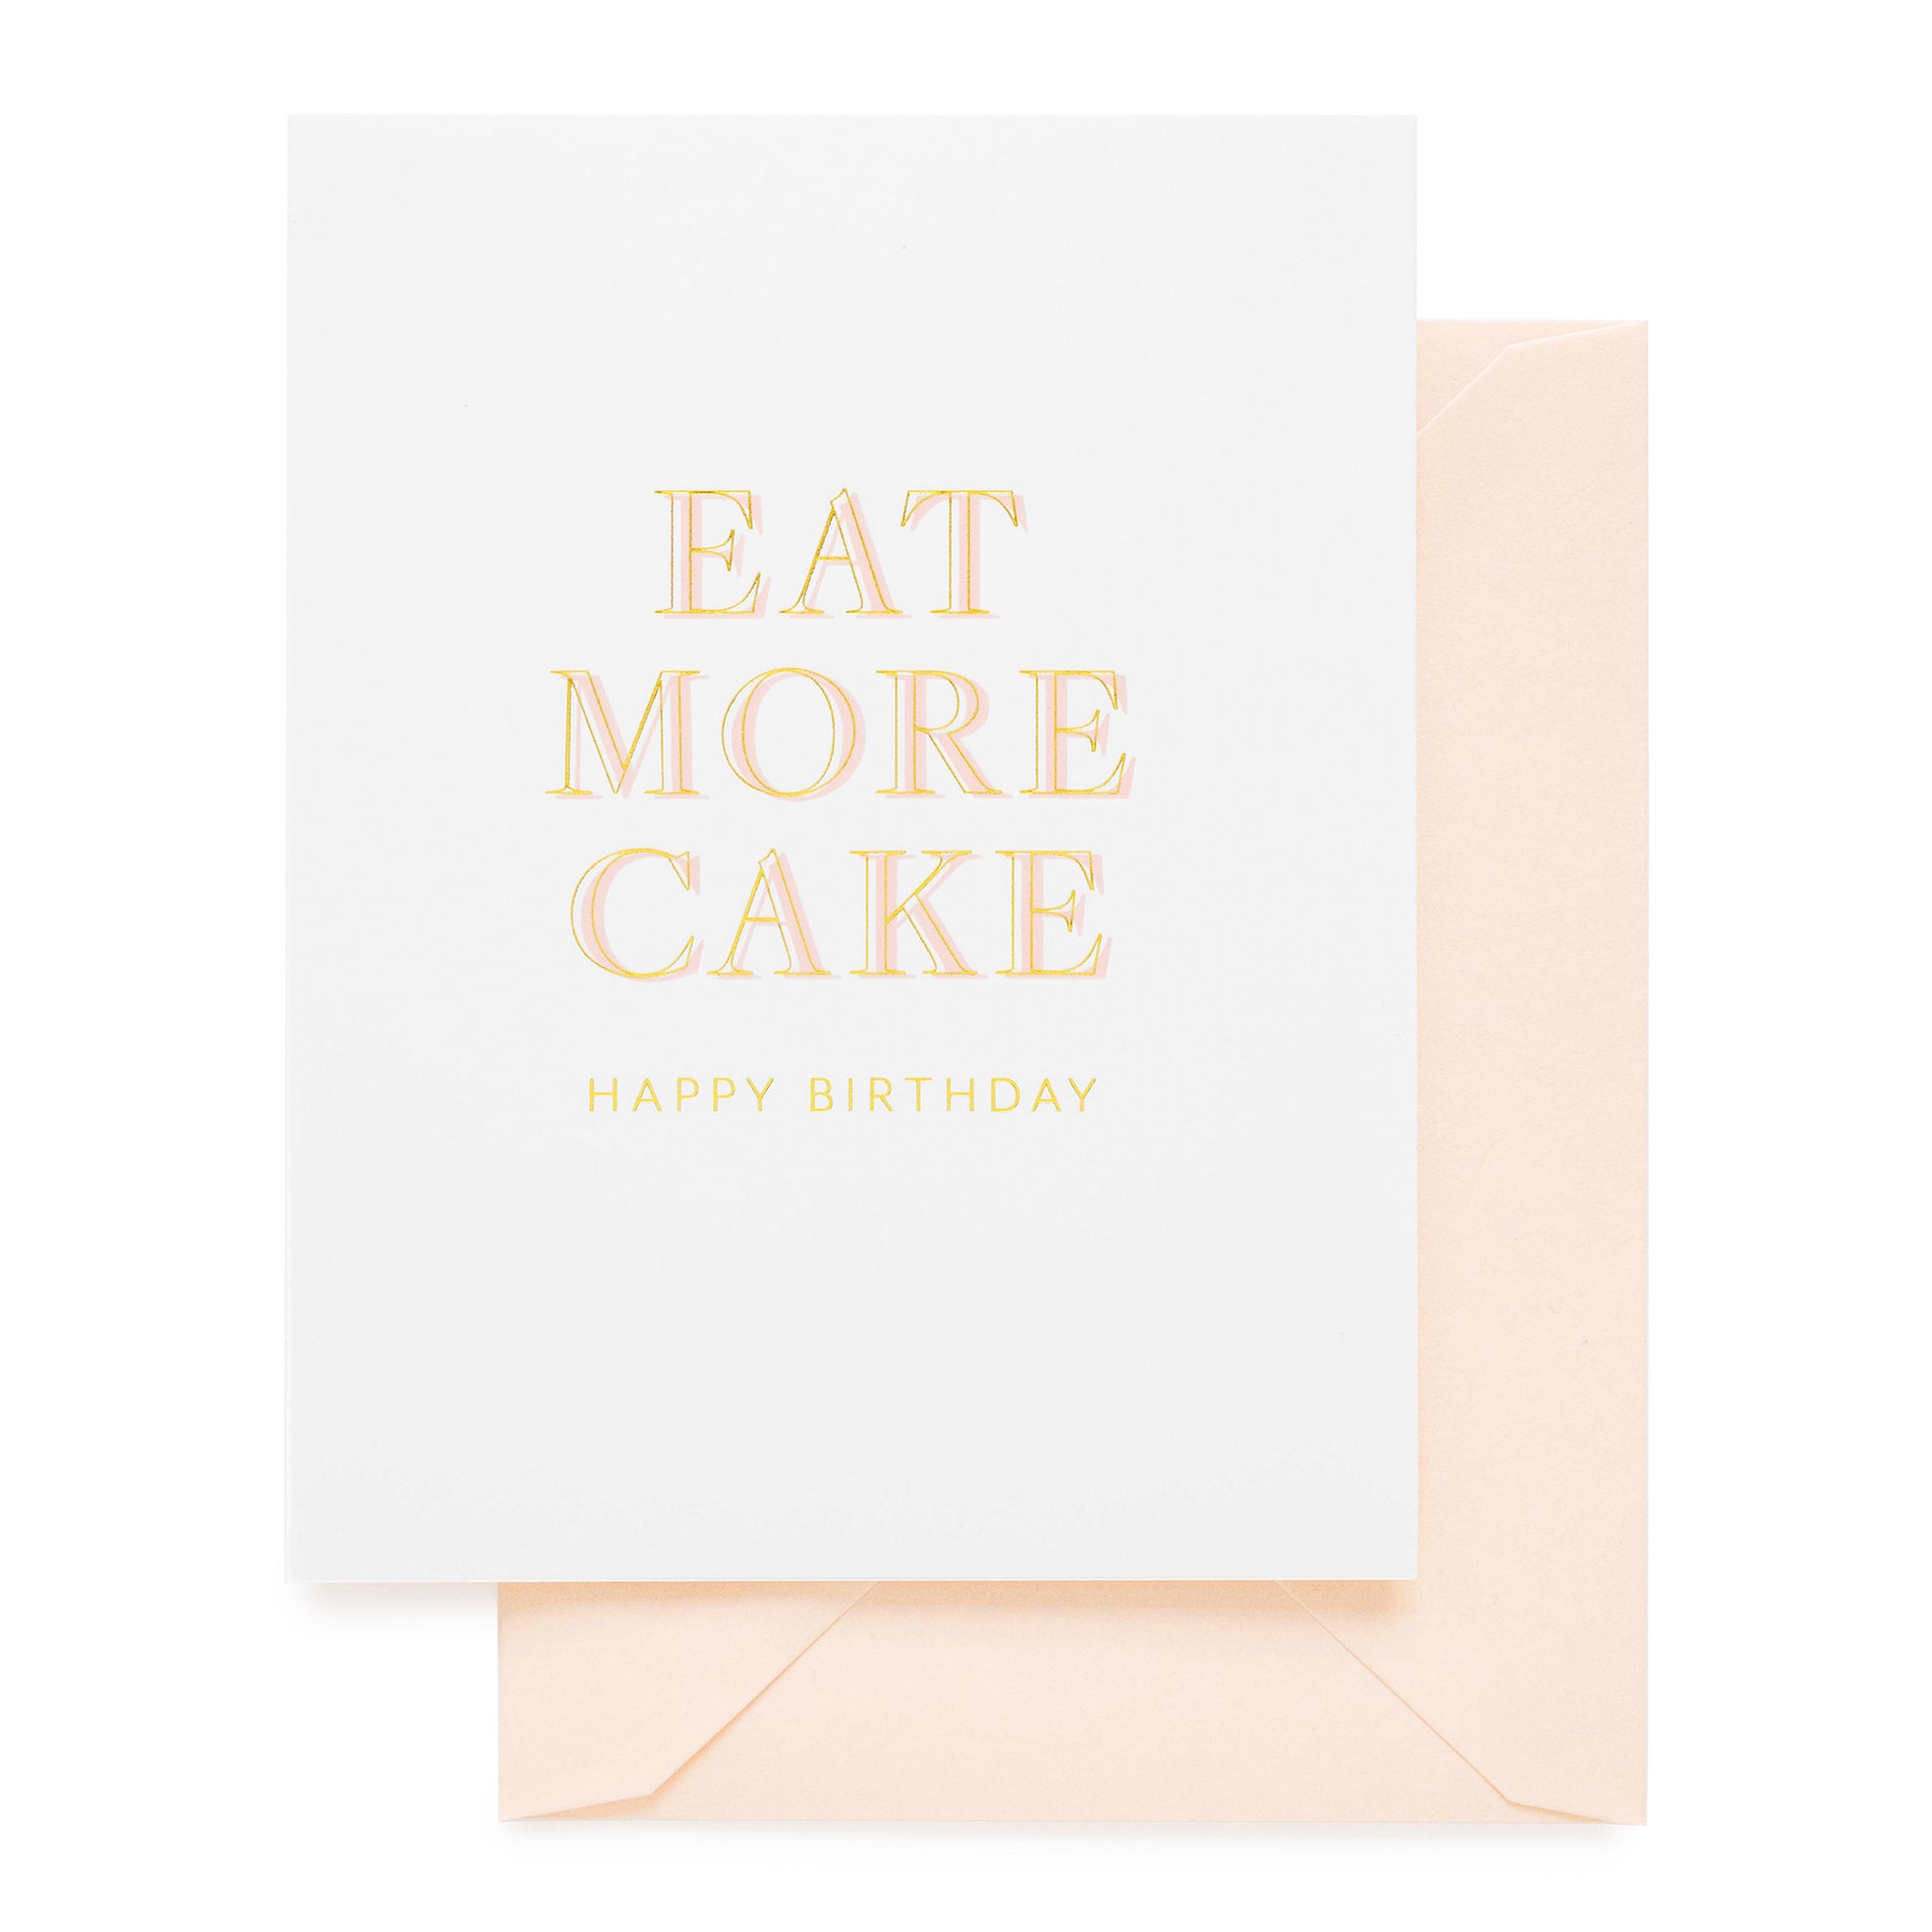 White birthday card printed in pink and gold foil with eat more cake happy birthday